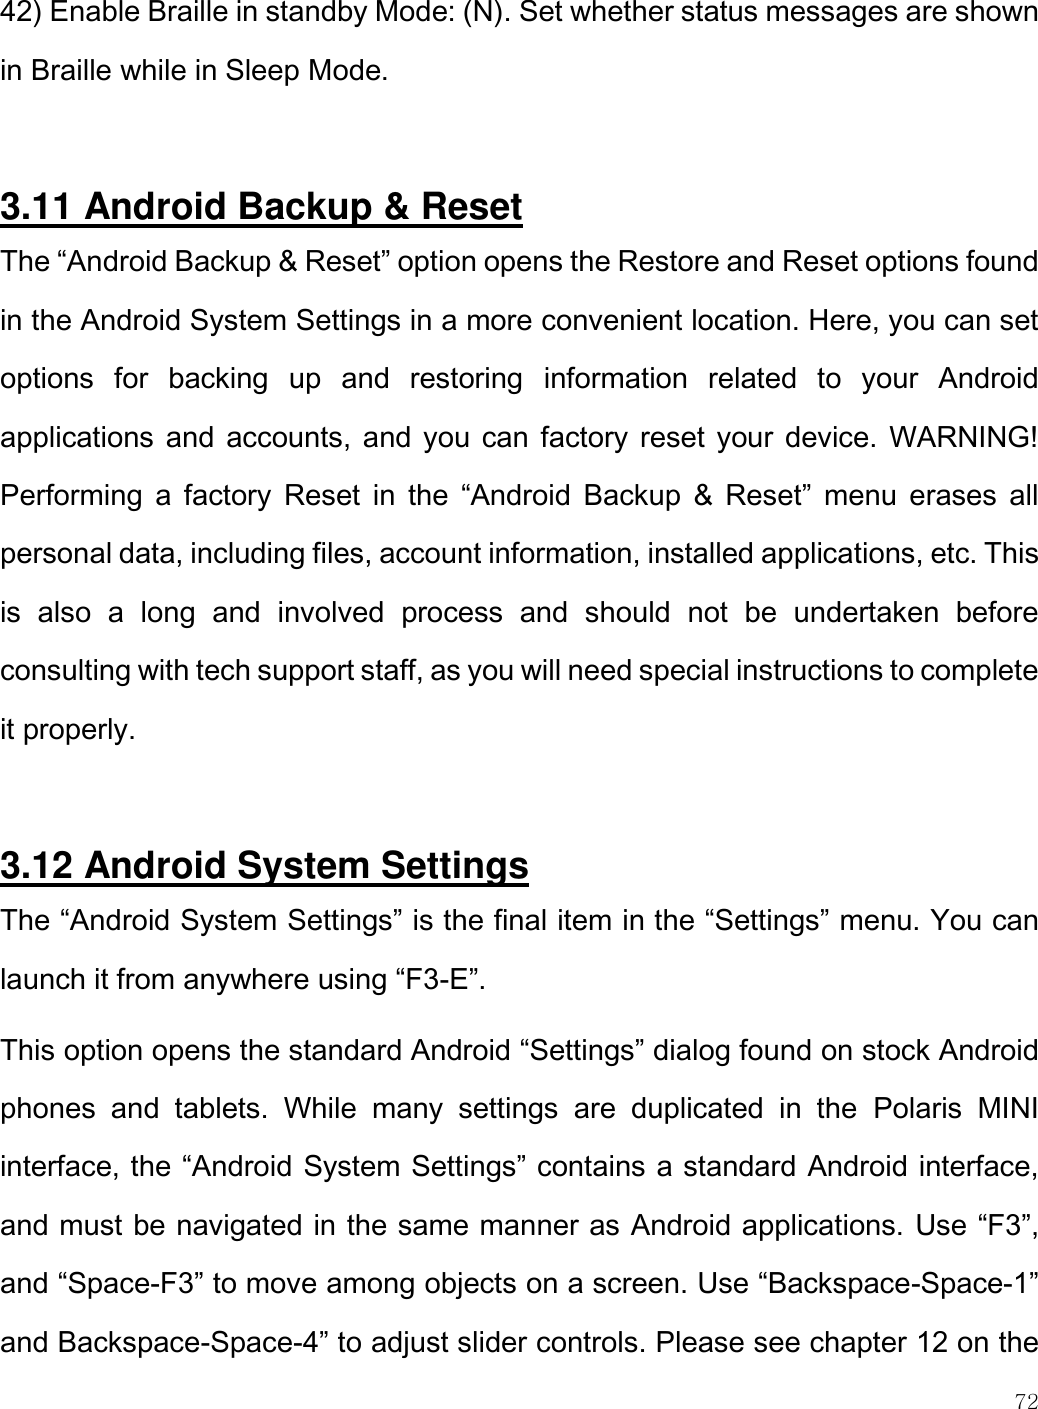    72  42) Enable Braille in standby Mode: (N). Set whether status messages are shown in Braille while in Sleep Mode.   3.11 Android Backup &amp; Reset The “Android Backup &amp; Reset” option opens the Restore and Reset options found in the Android System Settings in a more convenient location. Here, you can set options  for  backing  up  and  restoring  information  related  to  your  Android applications and accounts, and you can factory reset your device. WARNING! Performing  a factory  Reset  in  the  “Android  Backup  &amp;  Reset”  menu  erases  all personal data, including files, account information, installed applications, etc. This is  also  a  long  and  involved  process  and  should  not  be  undertaken  before consulting with tech support staff, as you will need special instructions to complete it properly.  3.12 Android System Settings The “Android System Settings” is the final item in the “Settings” menu. You can launch it from anywhere using “F3-E”. This option opens the standard Android “Settings” dialog found on stock Android phones  and  tablets.  While  many  settings  are  duplicated  in  the  Polaris  MINI interface, the “Android System Settings” contains a standard Android interface, and must be navigated in the same manner as Android applications. Use “F3”, and “Space-F3” to move among objects on a screen. Use “Backspace-Space-1” and Backspace-Space-4” to adjust slider controls. Please see chapter 12 on the 